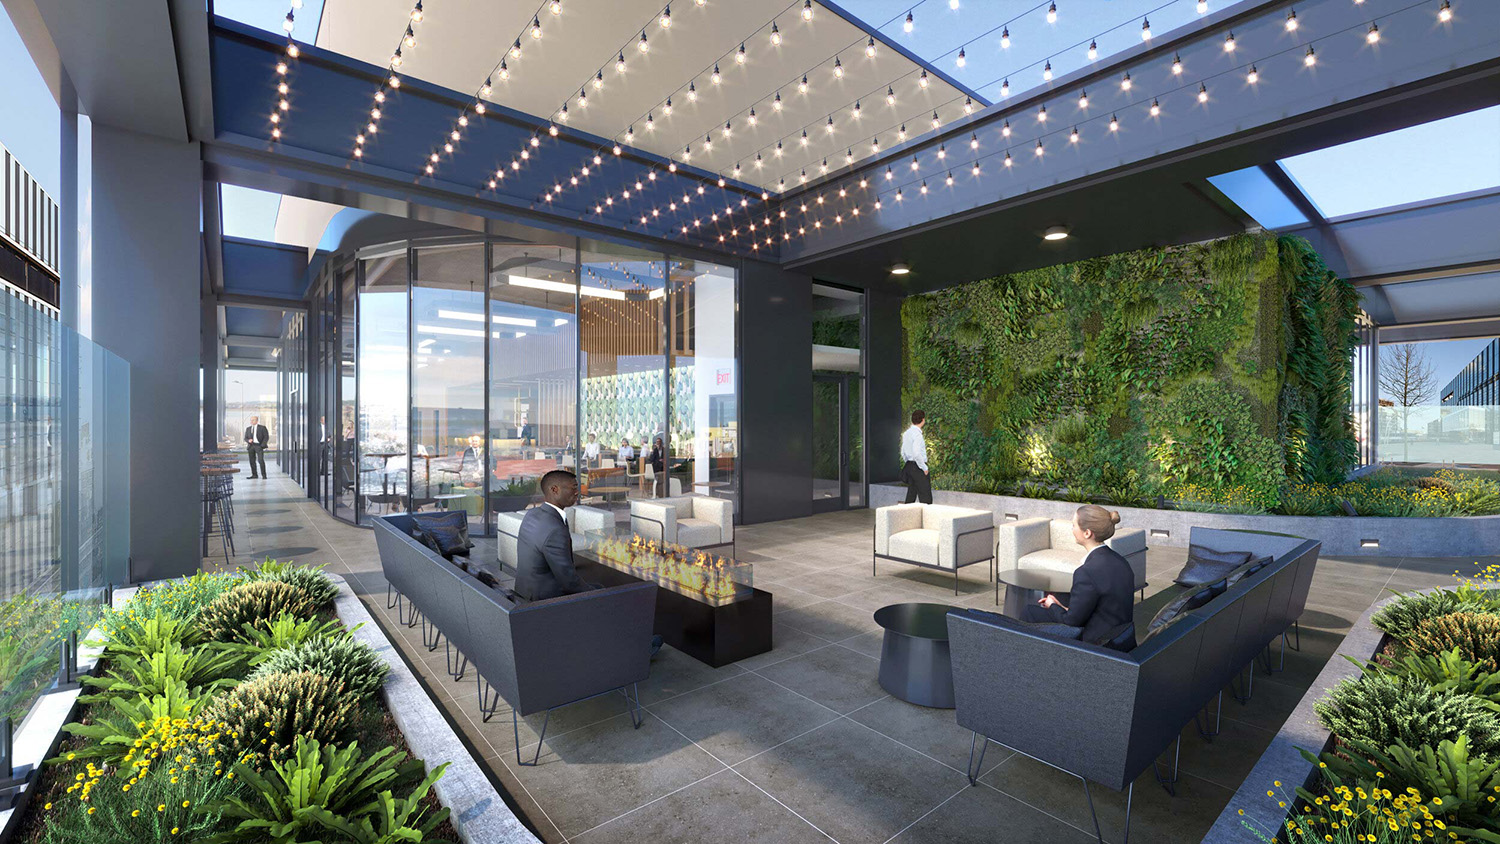 Outdoor Terrace at 311 W Huron Street. Rendering by NORR Architects